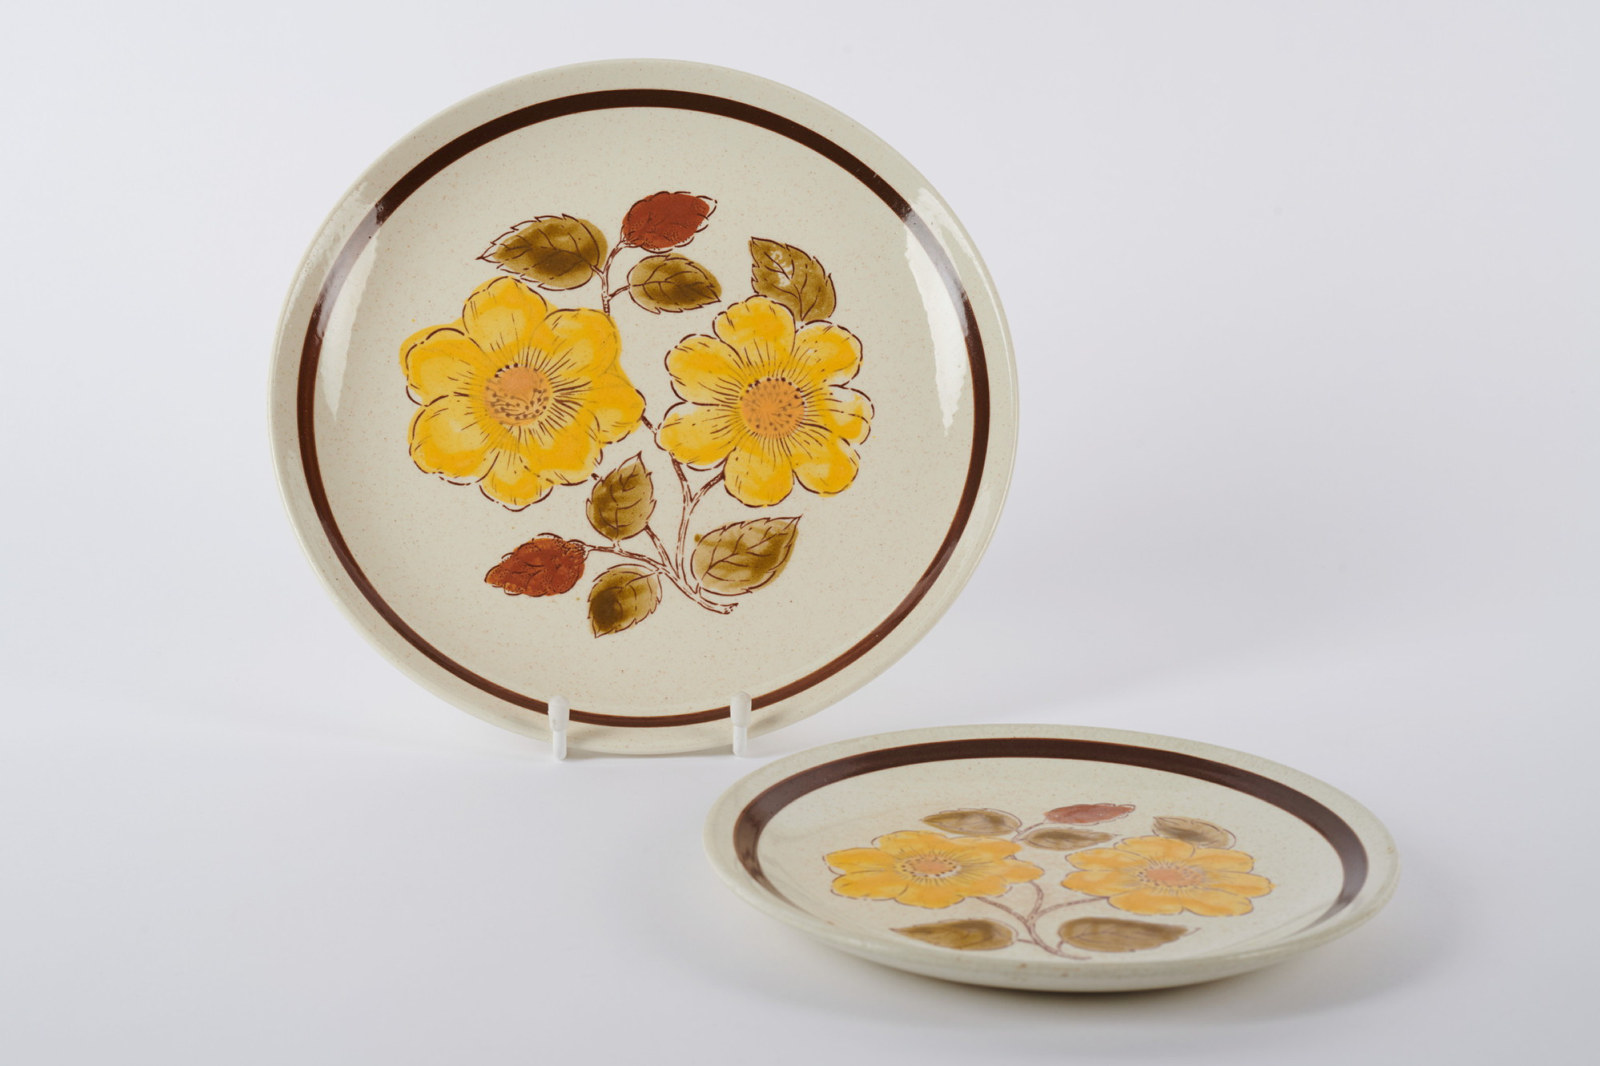 Two plates with yellow flower pattern and brown border.